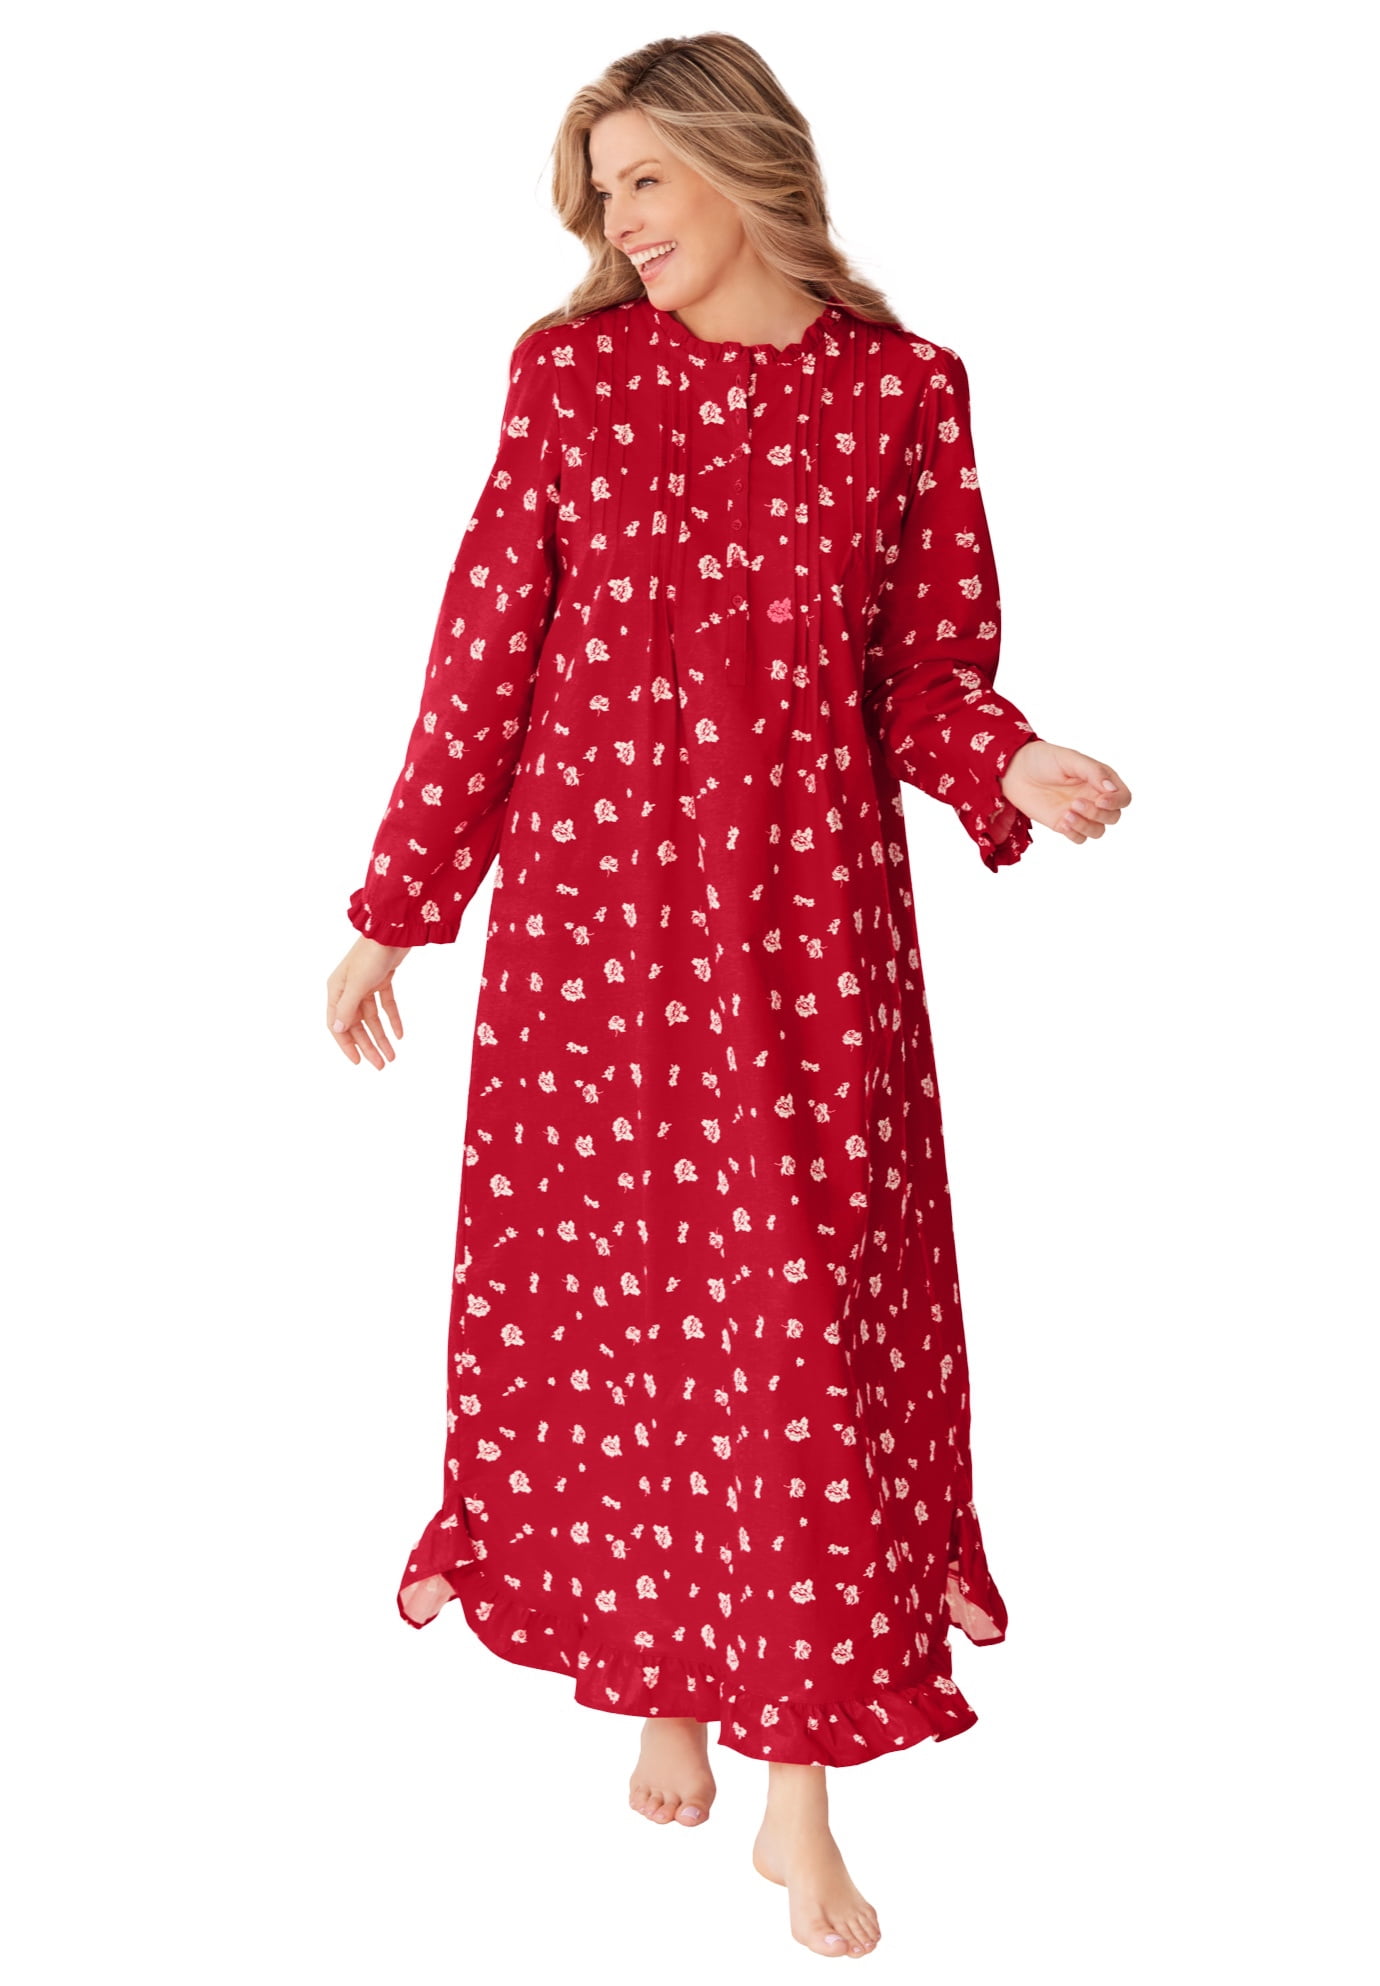 Only Necessities Women's Plus Size Long Flannel Nightgown Nightgown ...